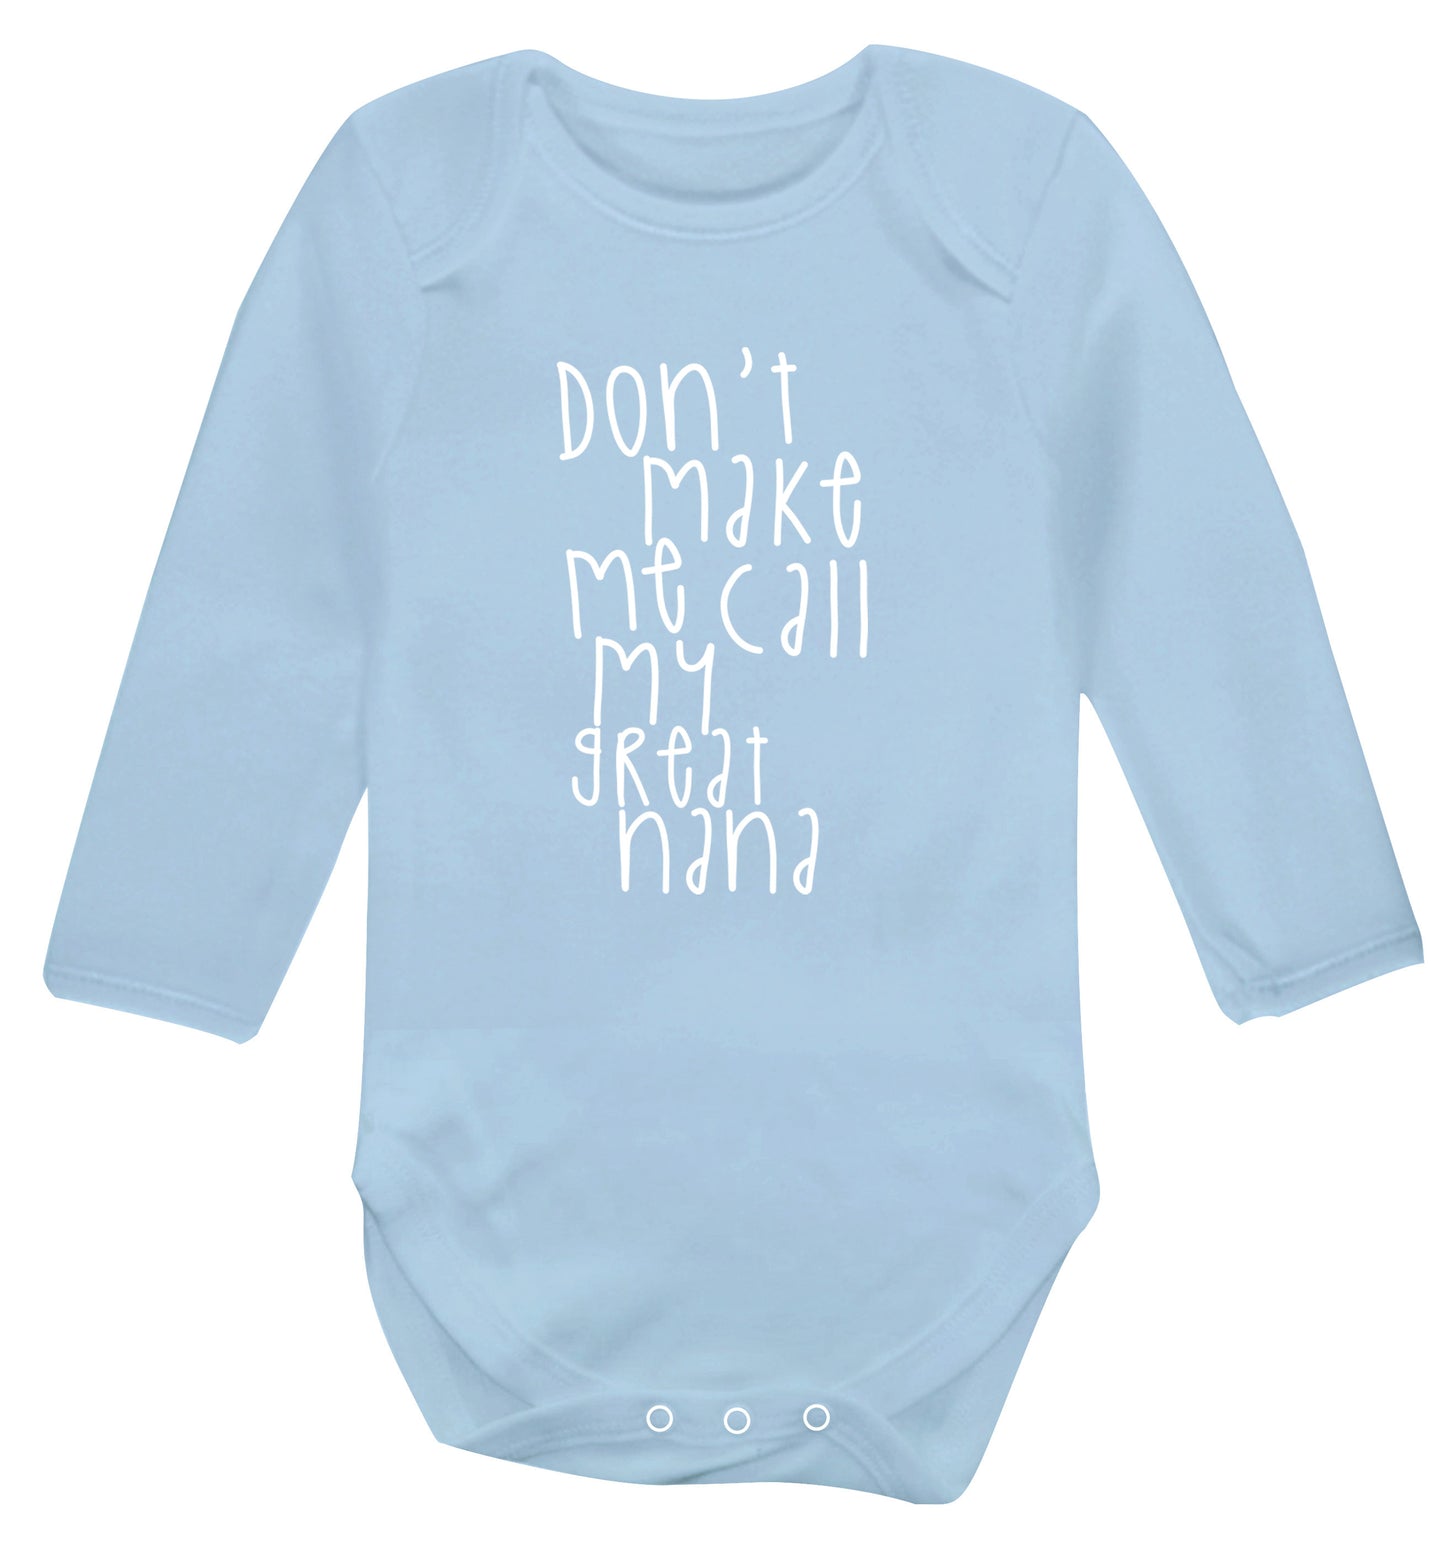 Don't make me call my great nana Baby Vest long sleeved pale blue 6-12 months